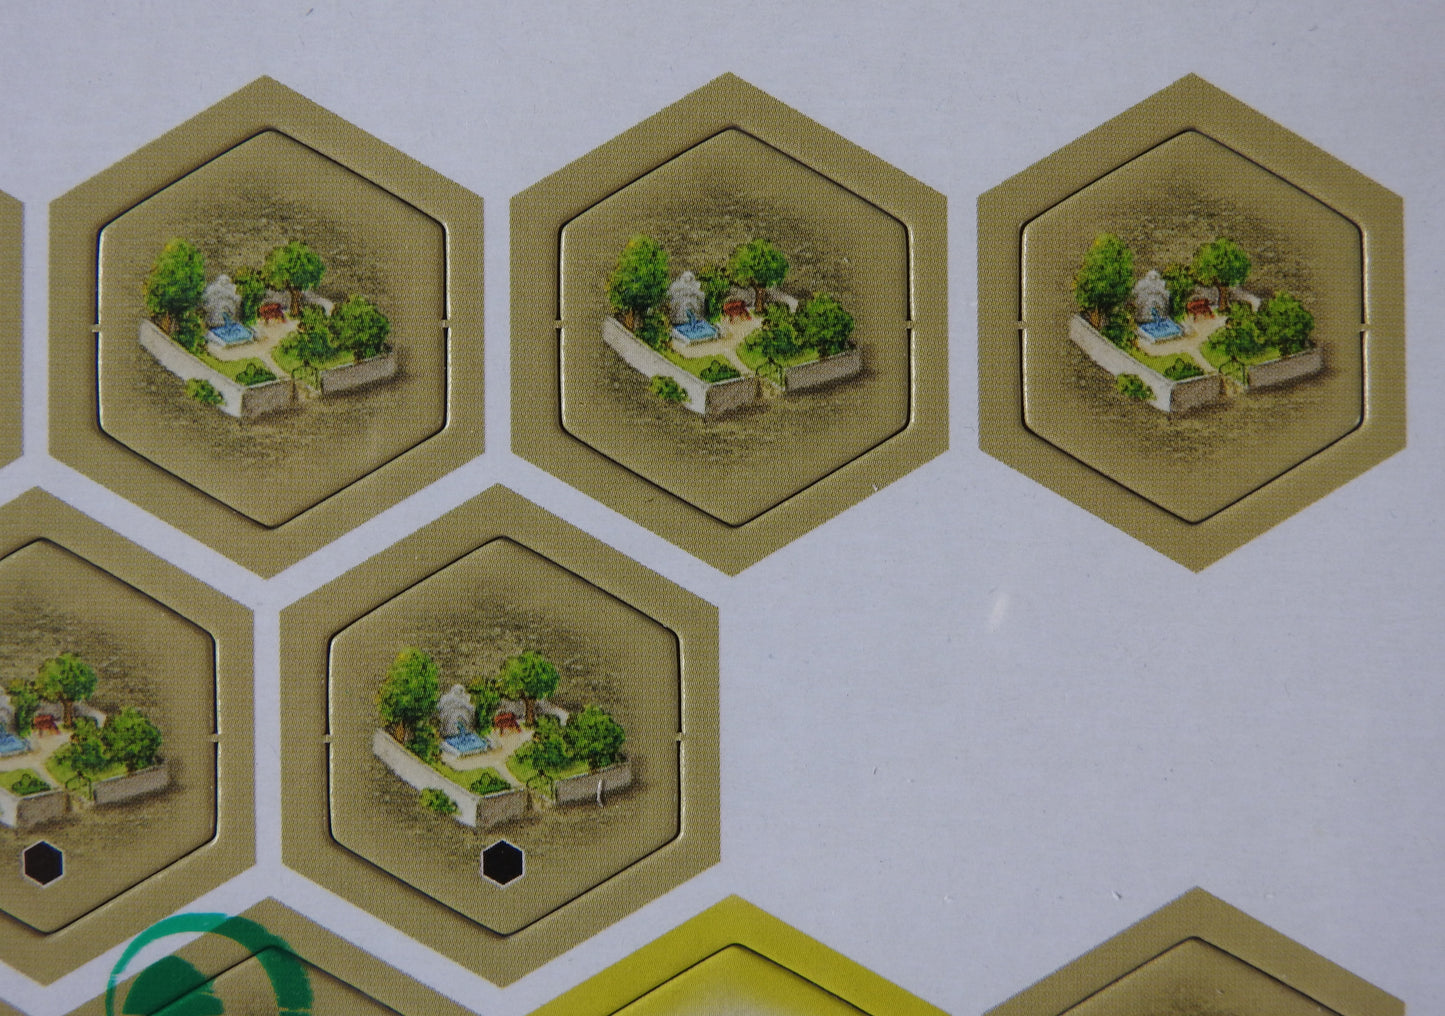 Close-up view of some more Pleasure Garden hexes.